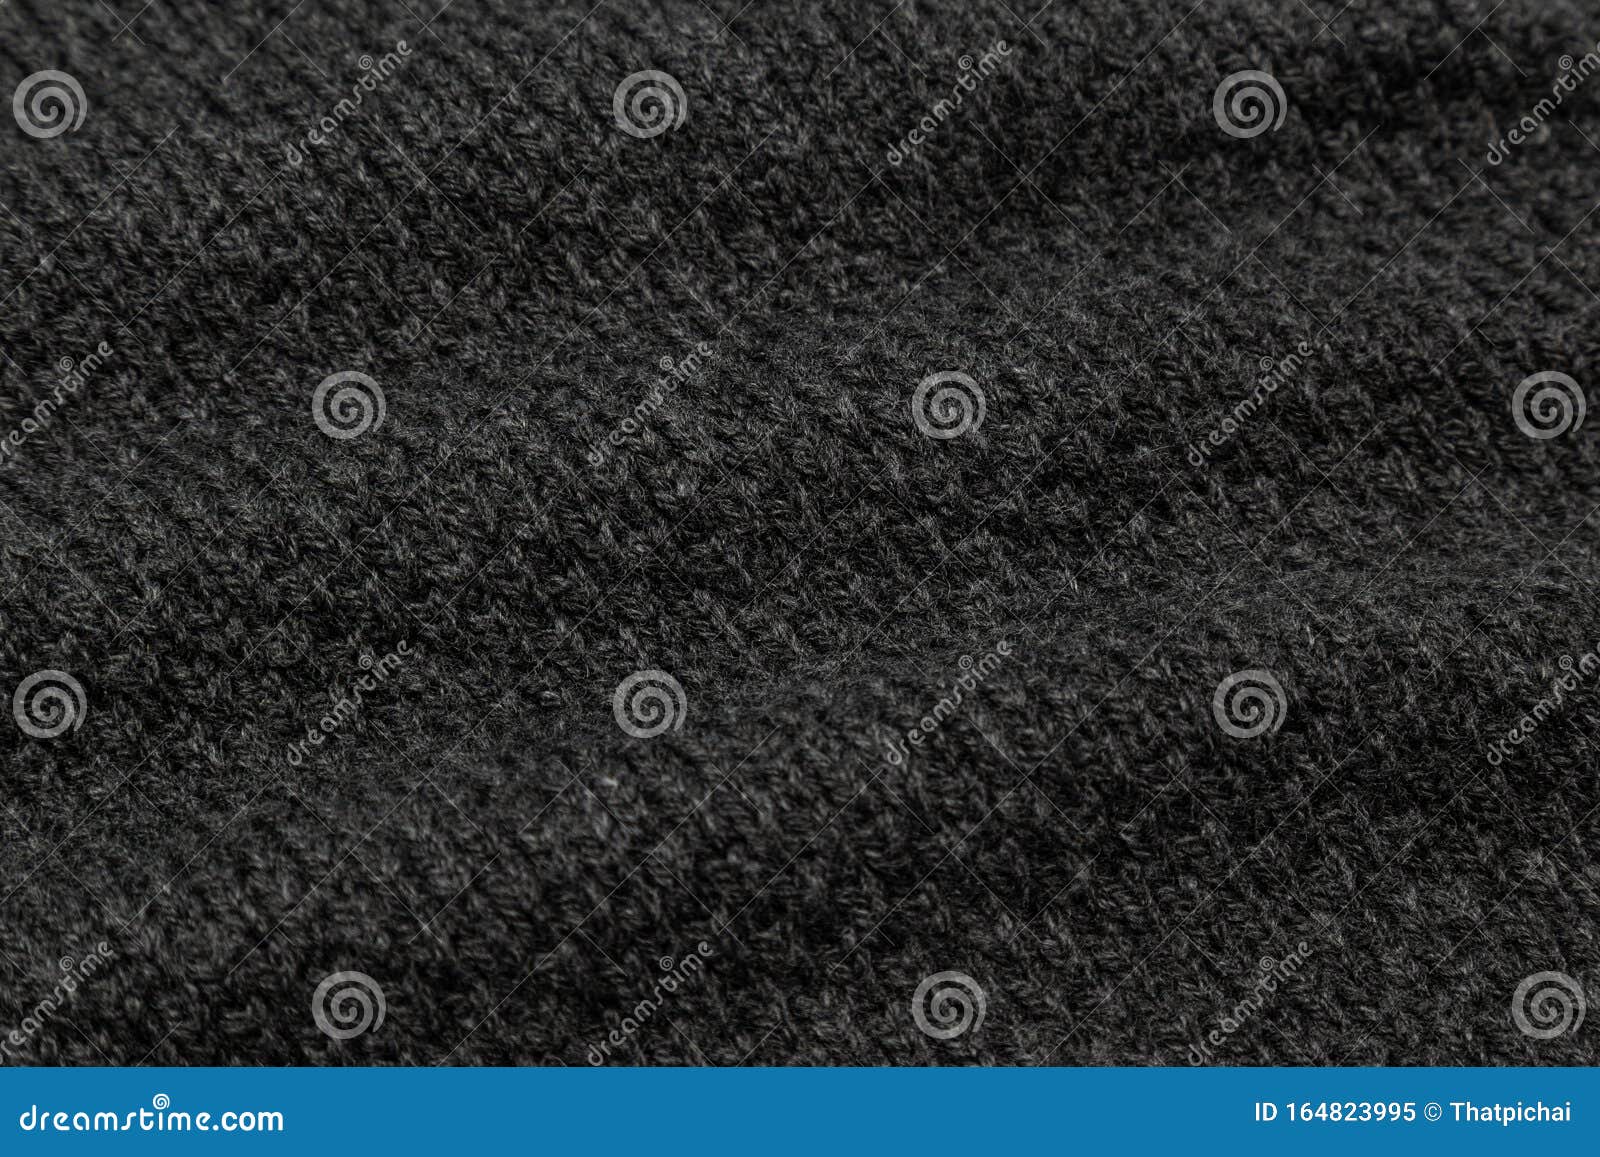 Black Fabric Texture, Cloth Pattern Background. Stock Image - Image of ...